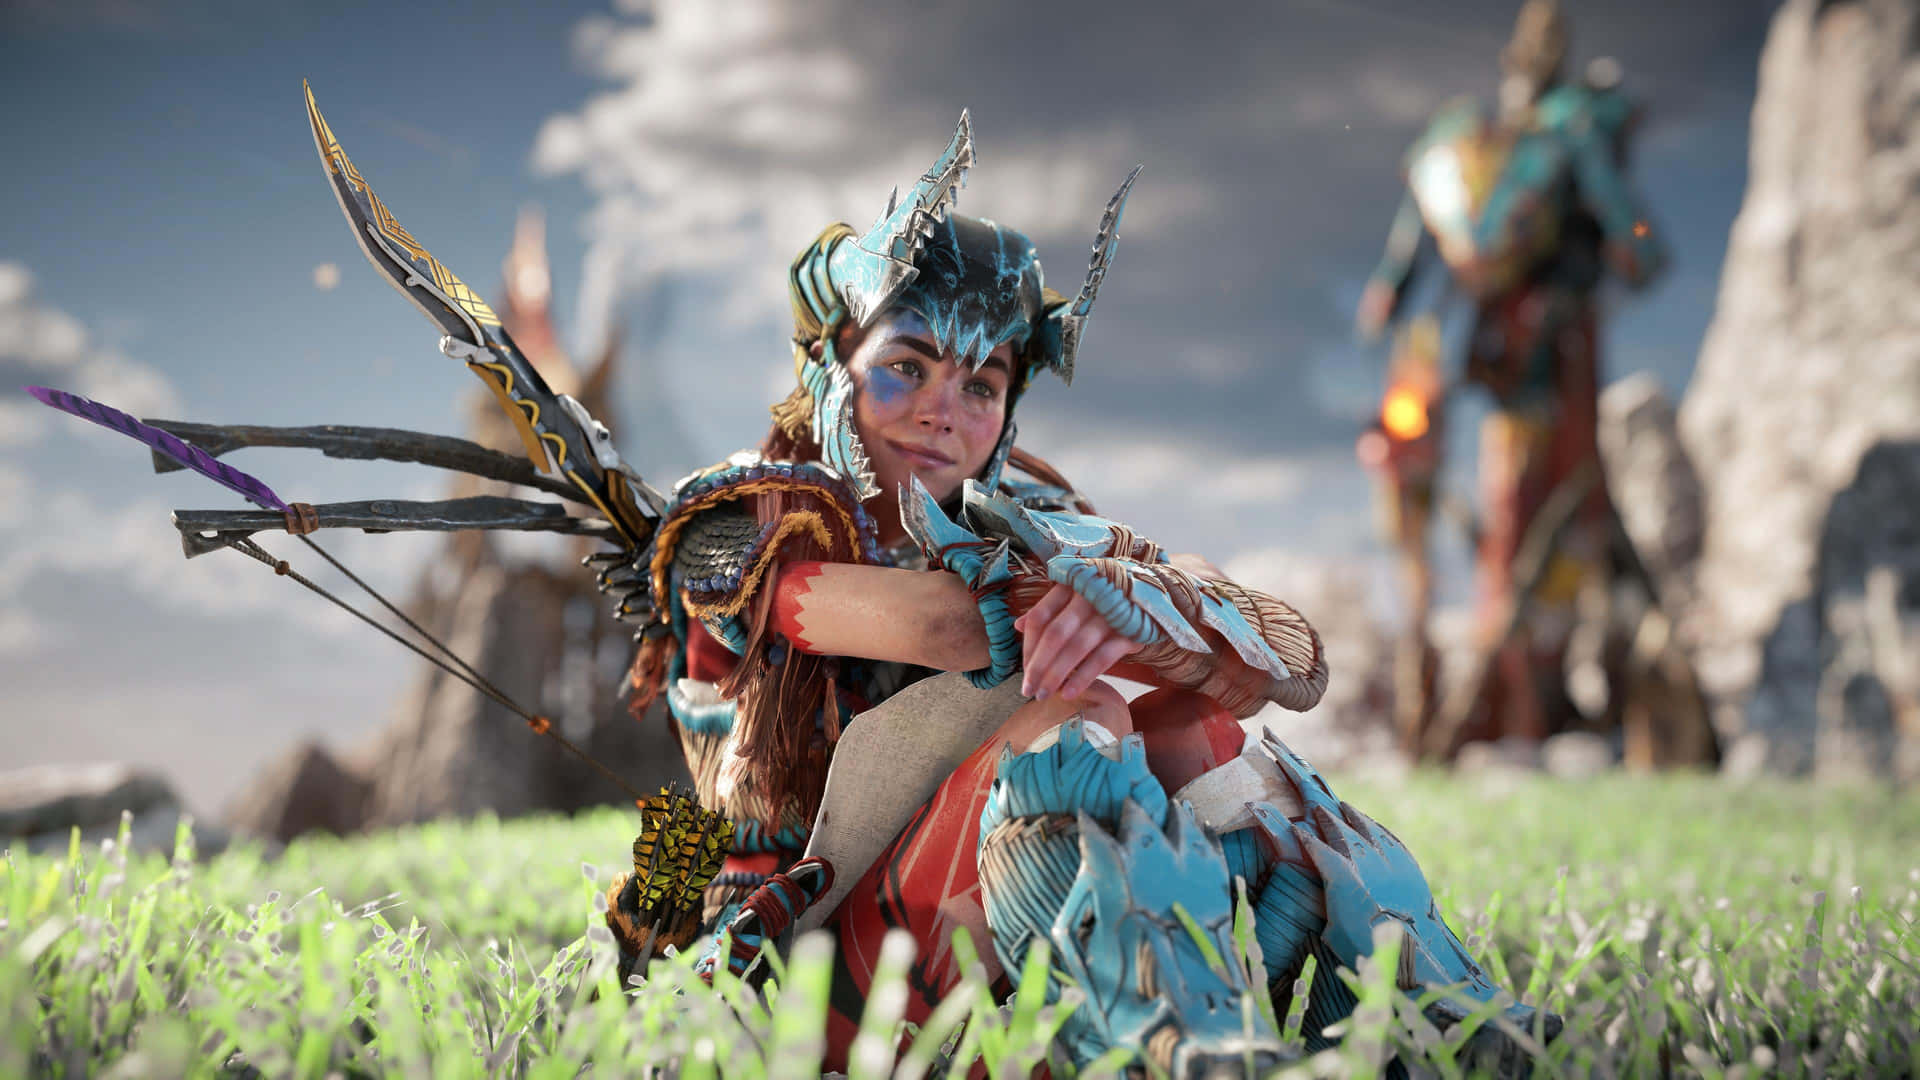 A Woman In A Fantasy Costume Sitting On A Grassy Field Wallpaper